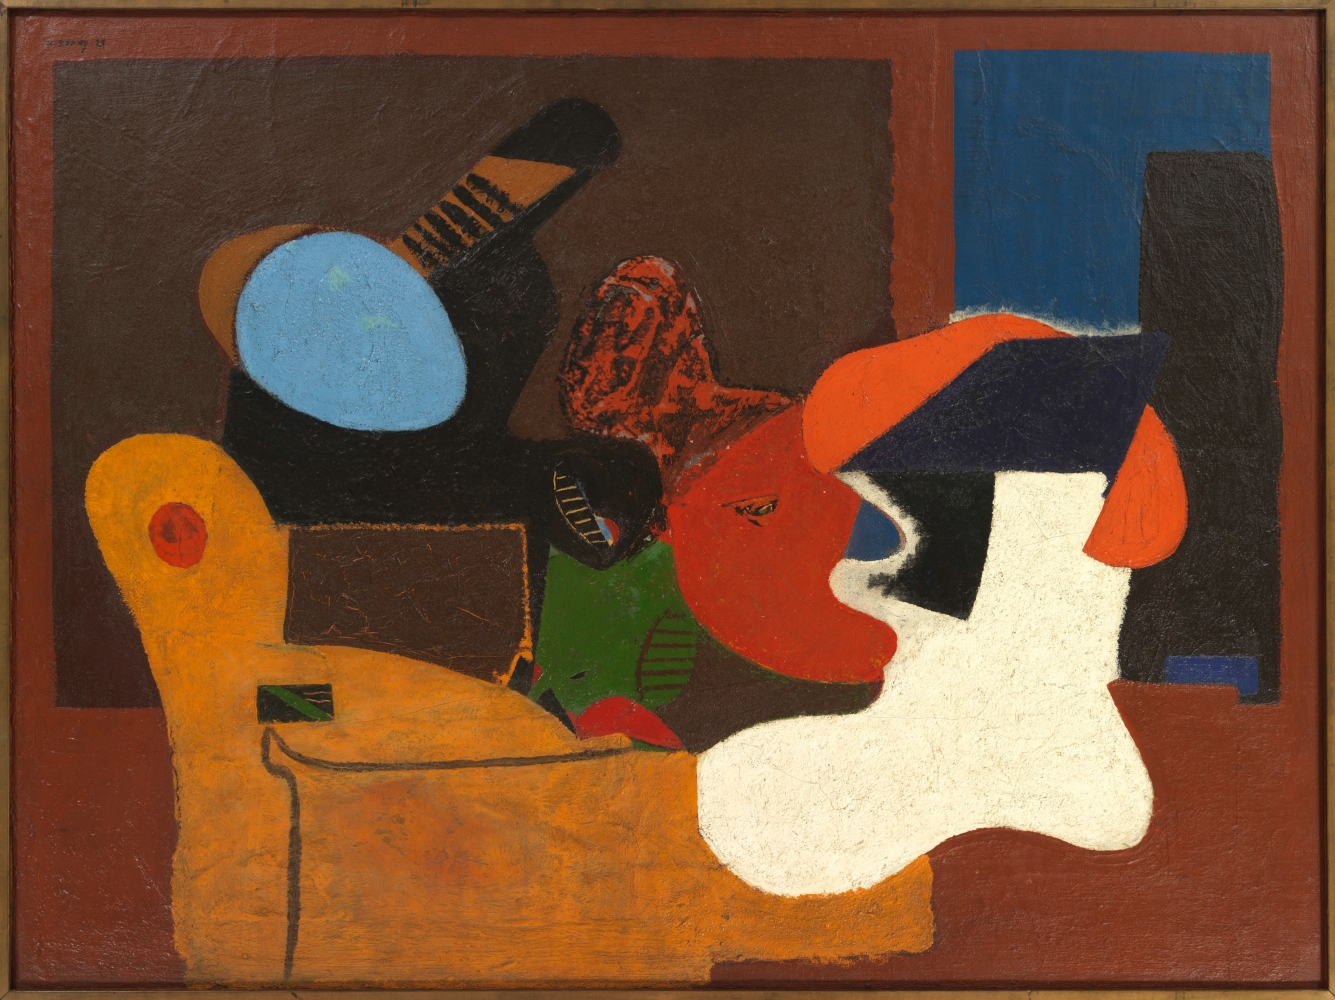 Still Life,&amp;nbsp;1929, oil on canvas,&amp;nbsp;36 1/4 x 48 1/8 in. (92.1 x 122.2 cm). Private collection. [AGCR: P073]